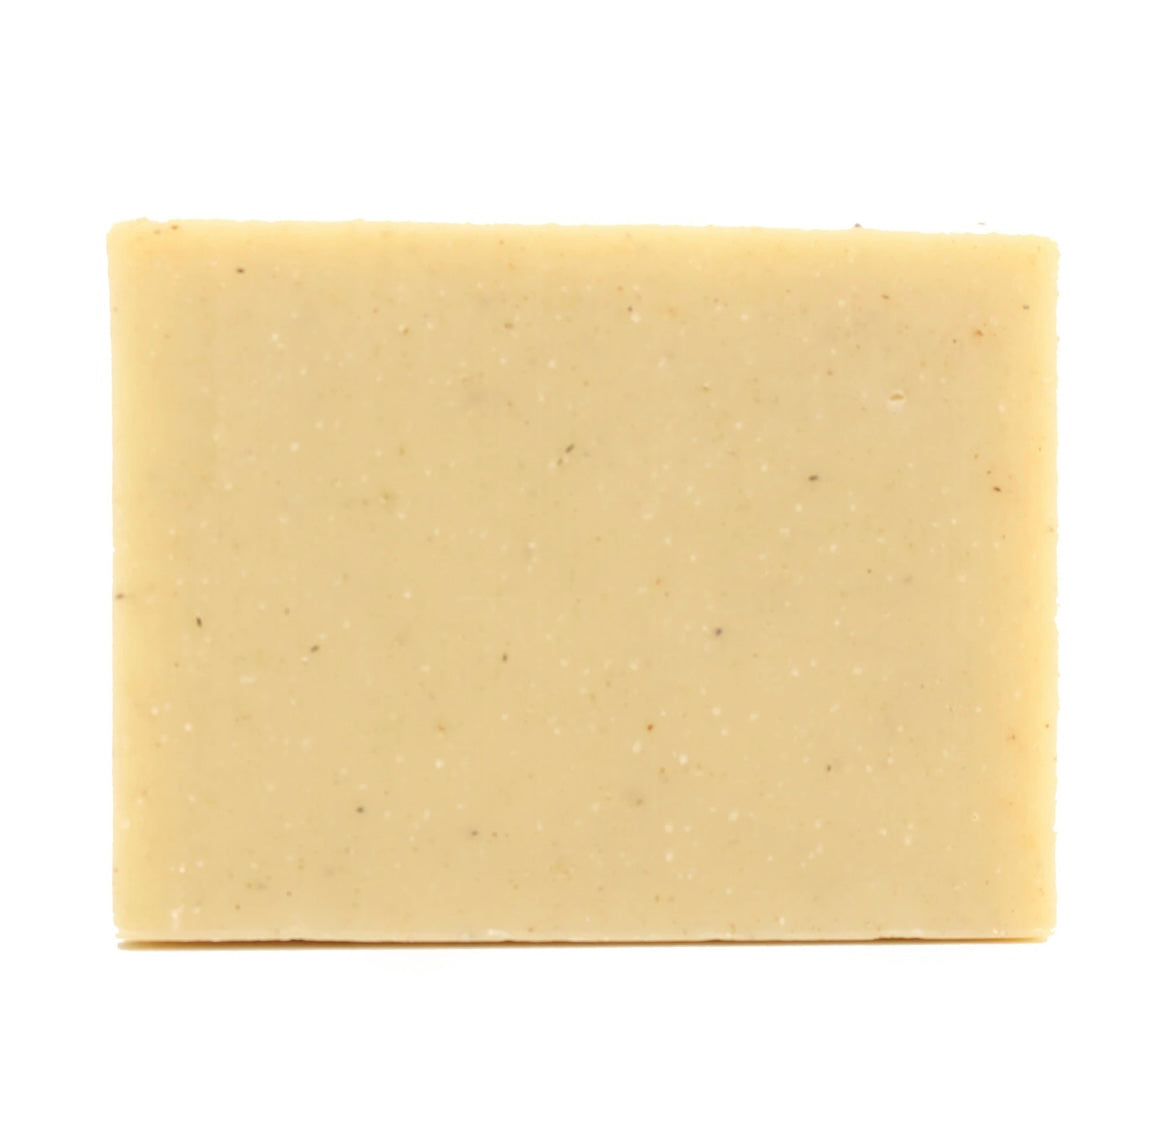 Face Mate - Teatree Oil & Rhassoul Clay - Extra Large Organic Bar Soap